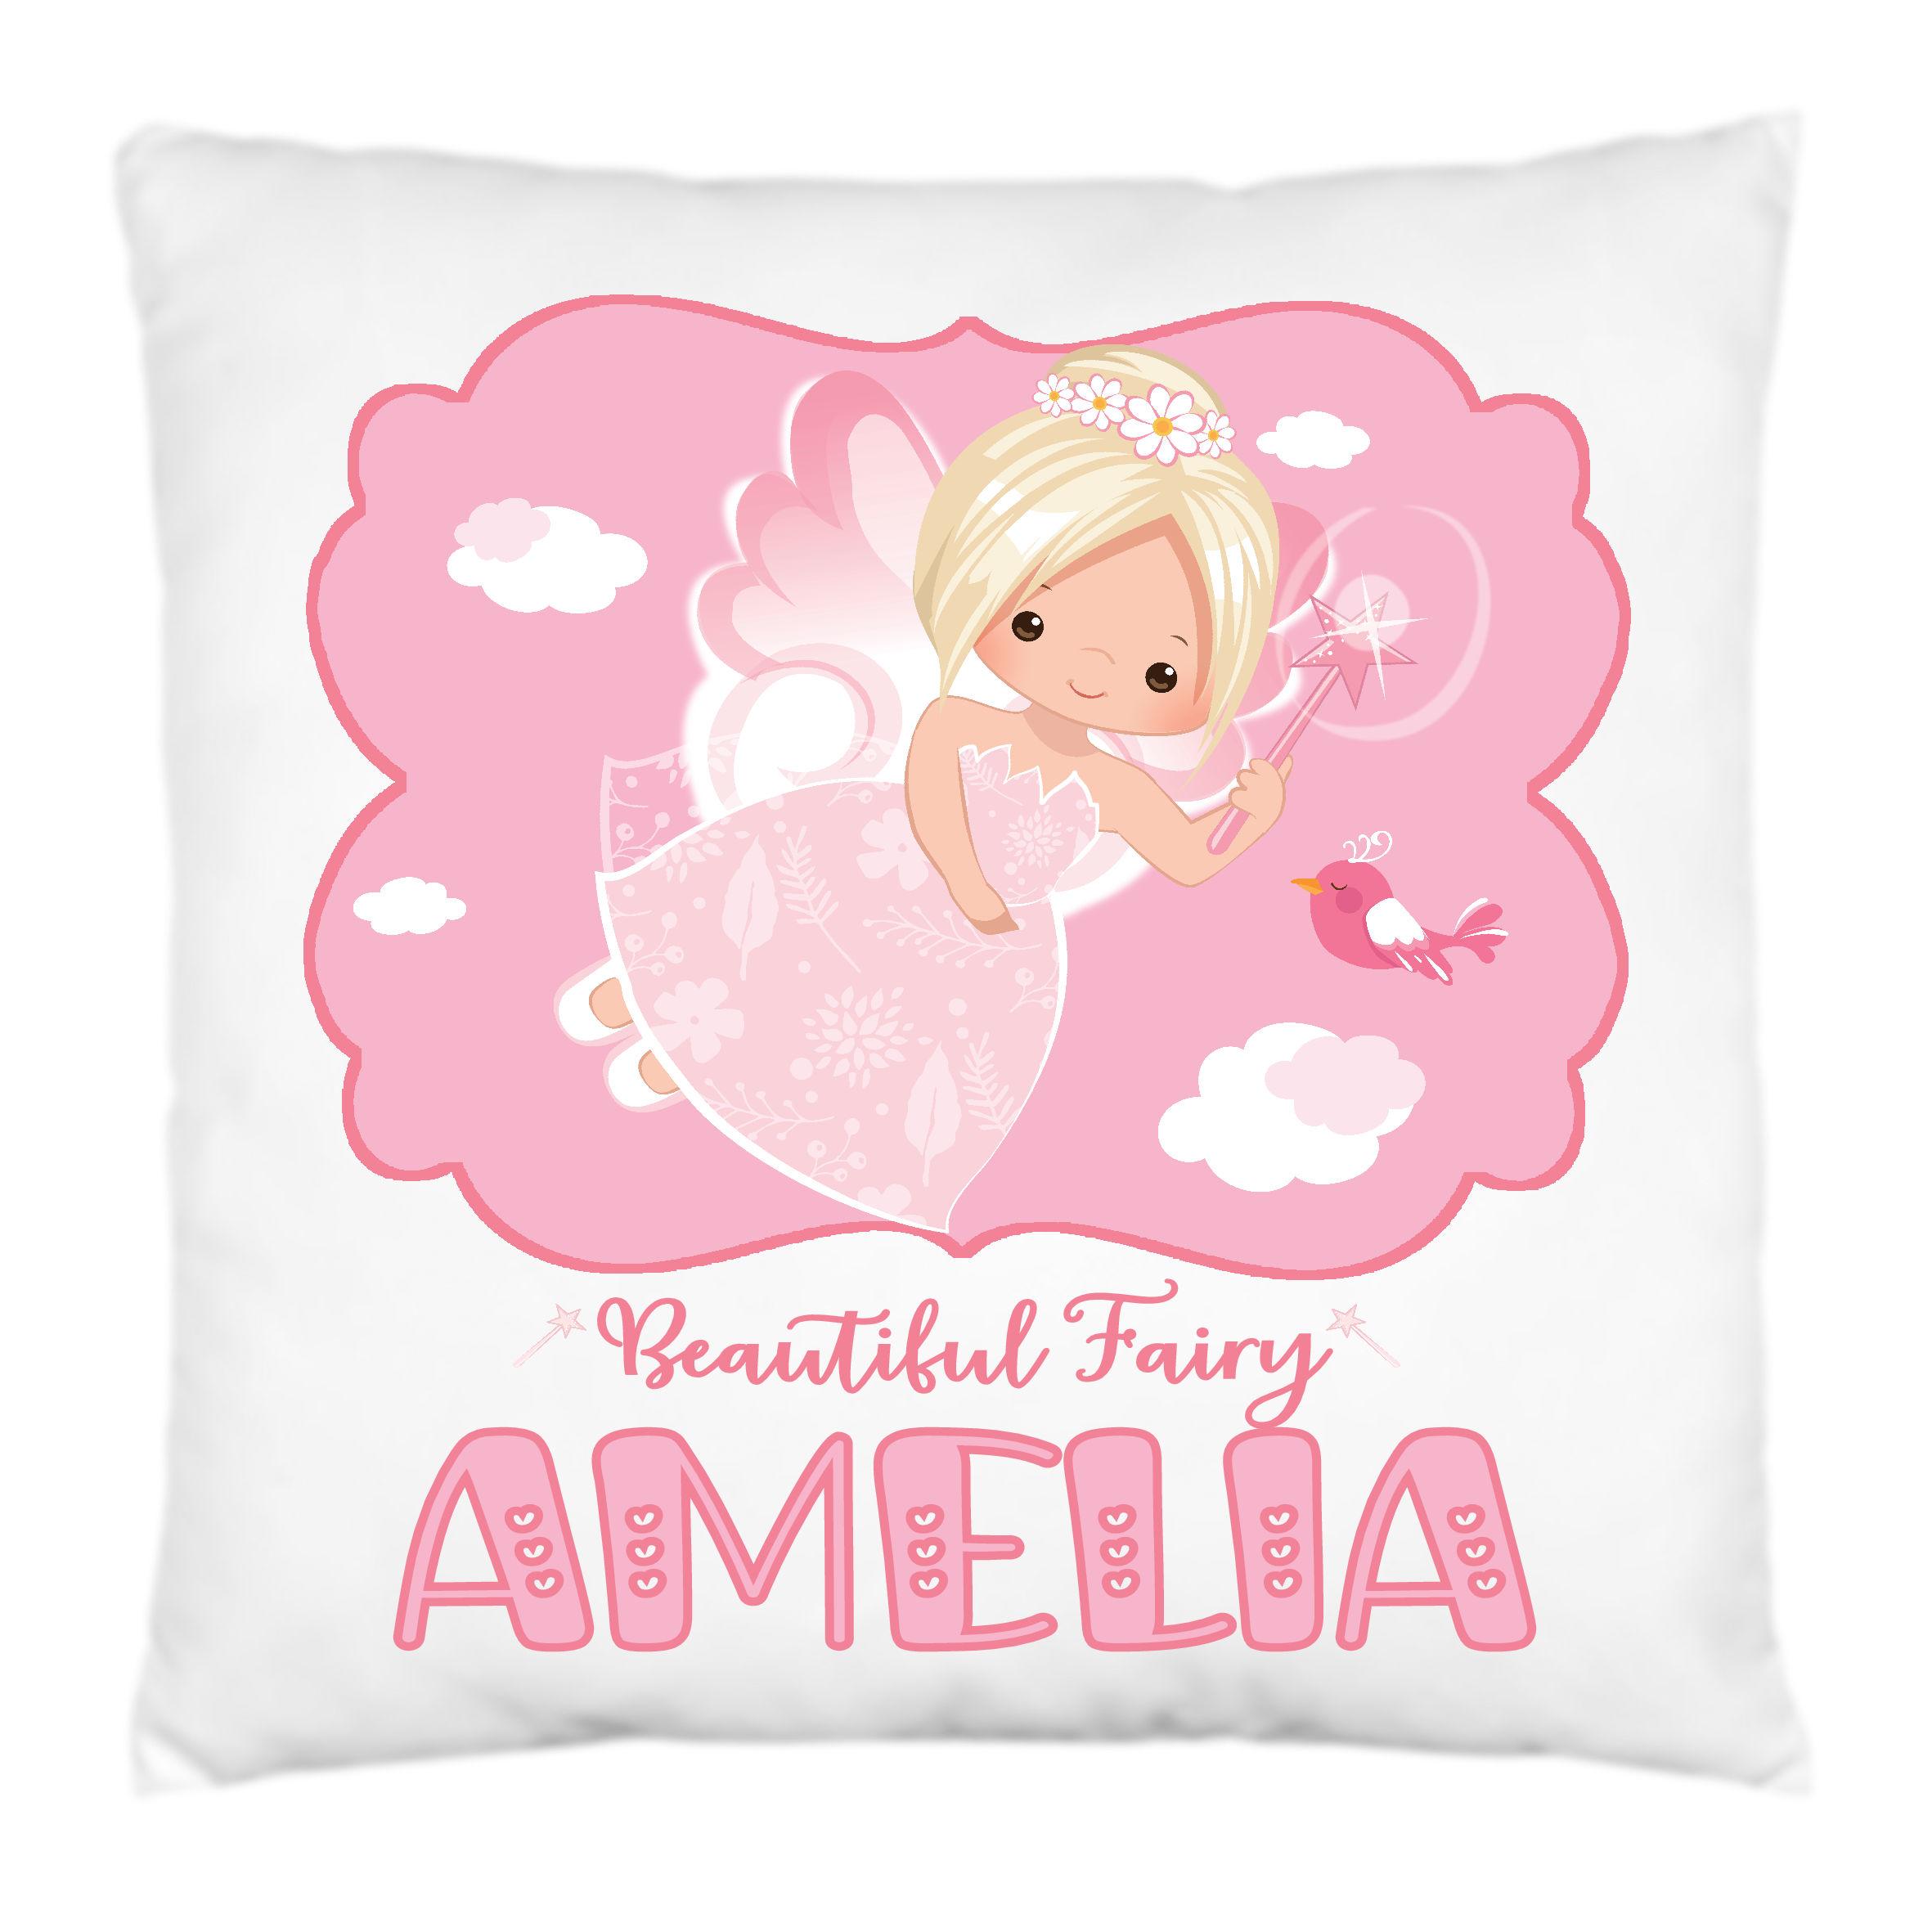 Fairy Cushion Personalised Pillow Throw Blonde or Dark Hair, Personalised Gift for Girls,Home Decor,Girls Bedroom Accessory